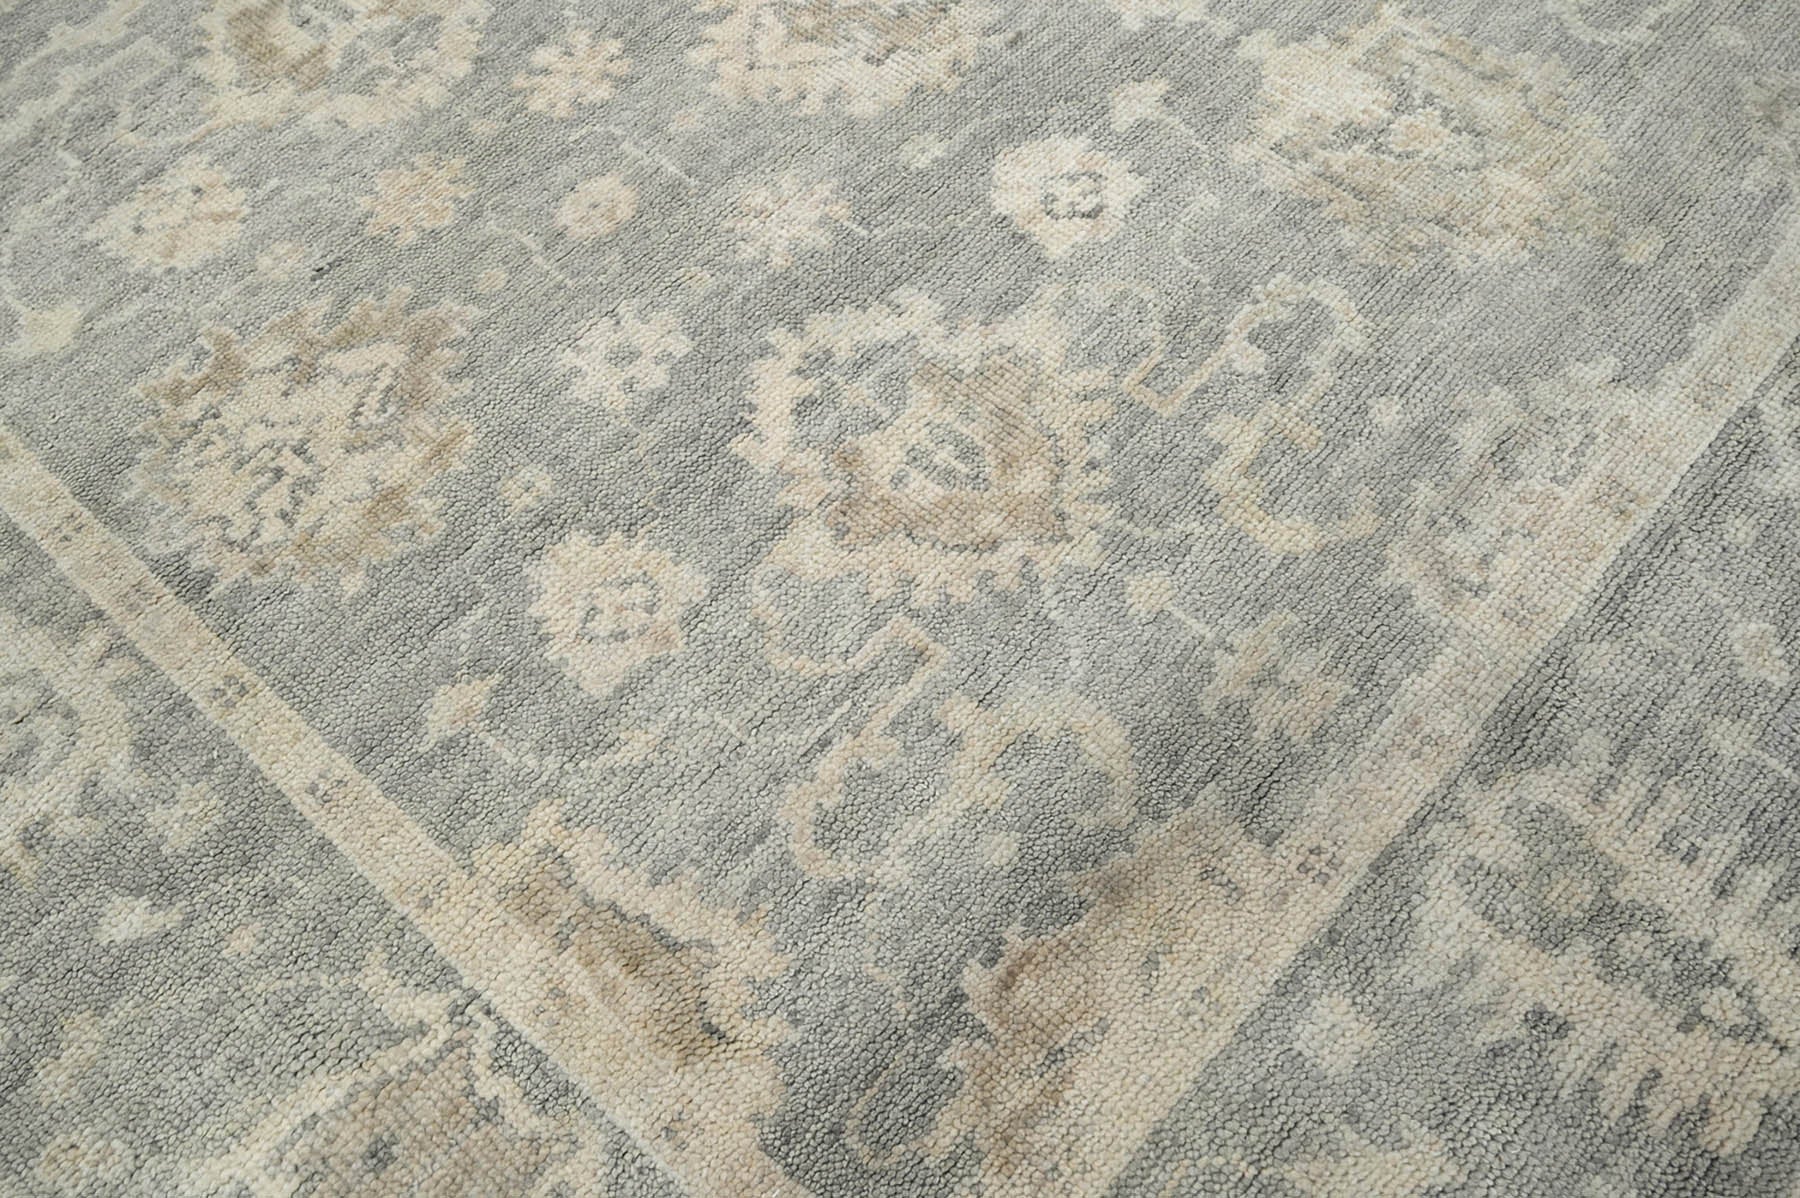 Emete 10x14 Gray LoomBloom Hand Knotted Traditional Patterned Oushak 100% Wool Oriental Area Rug